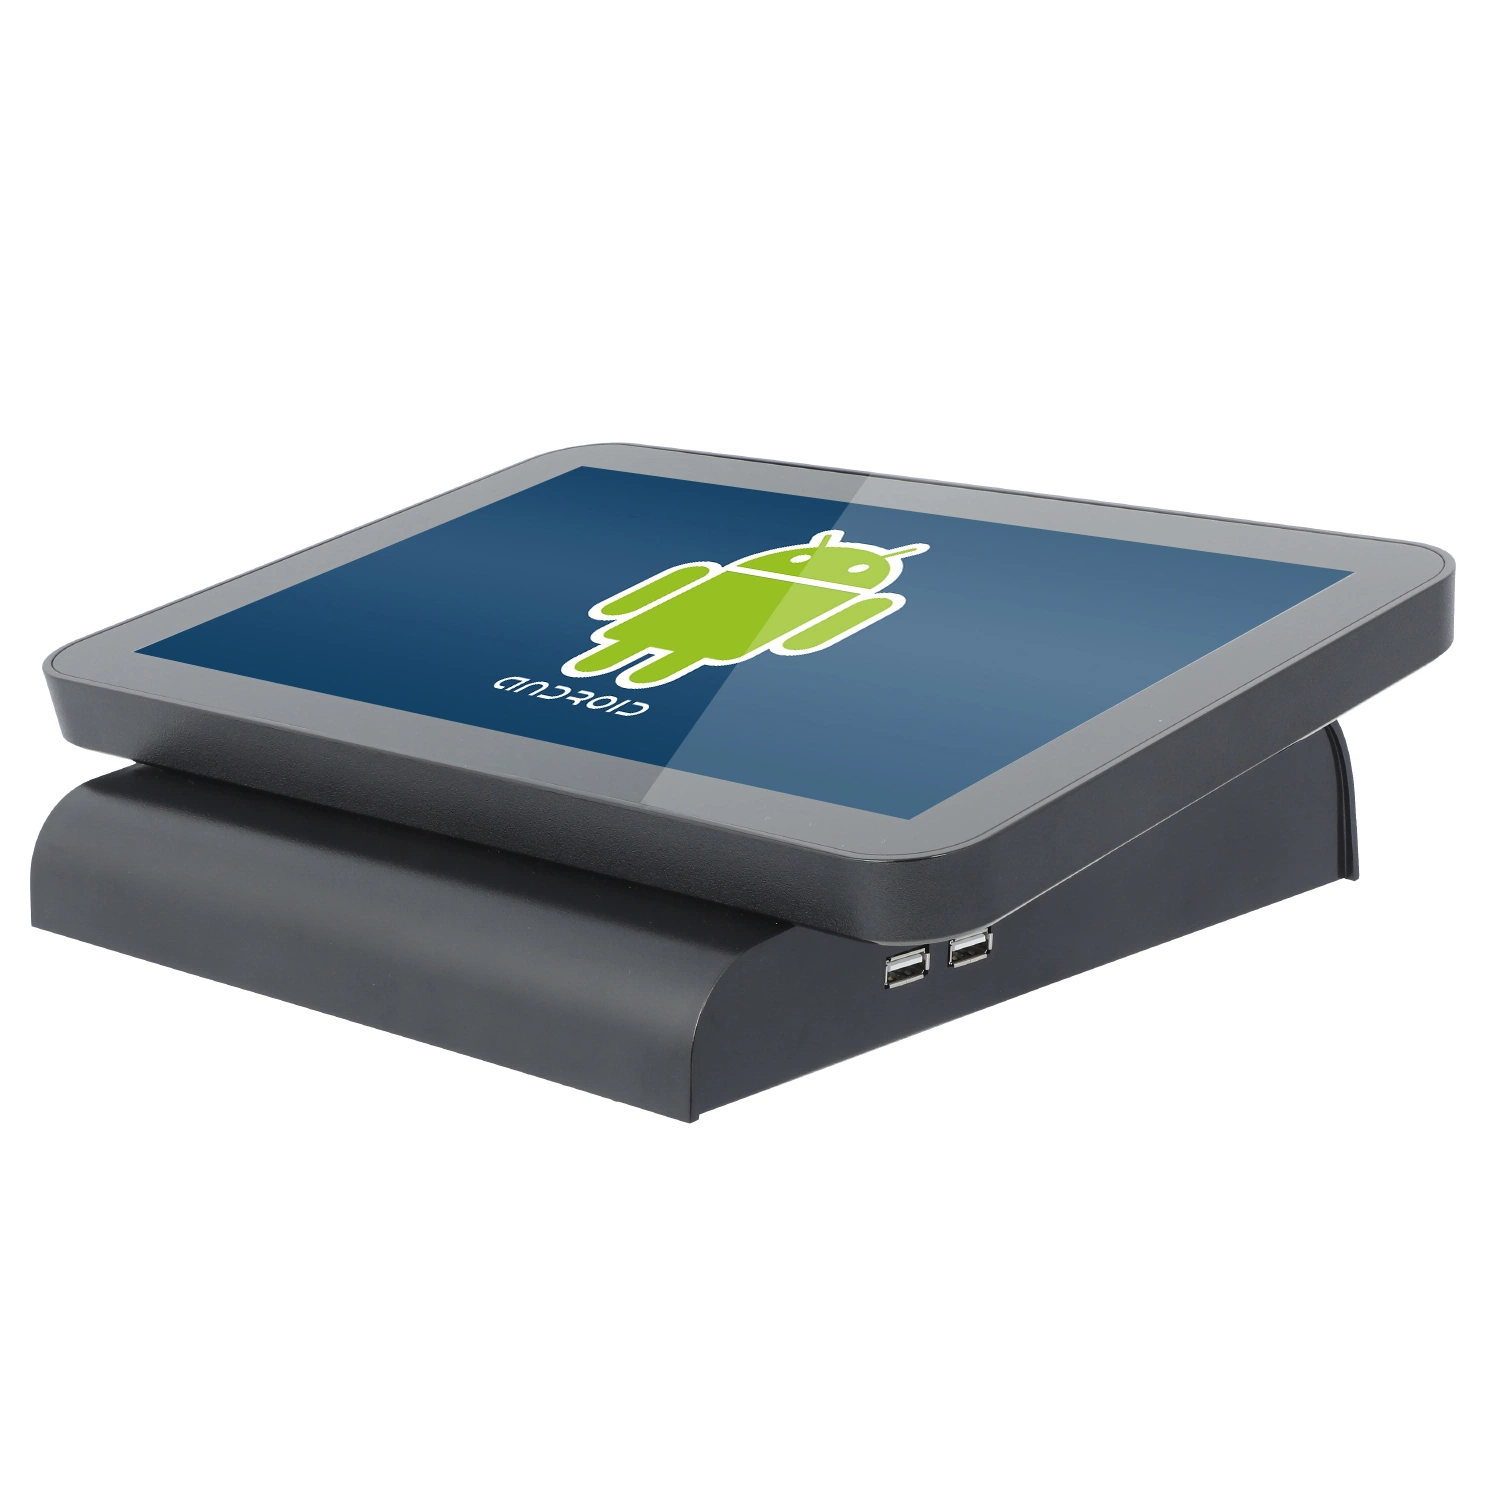 Restaurant Android POS-System Business Point of Sale